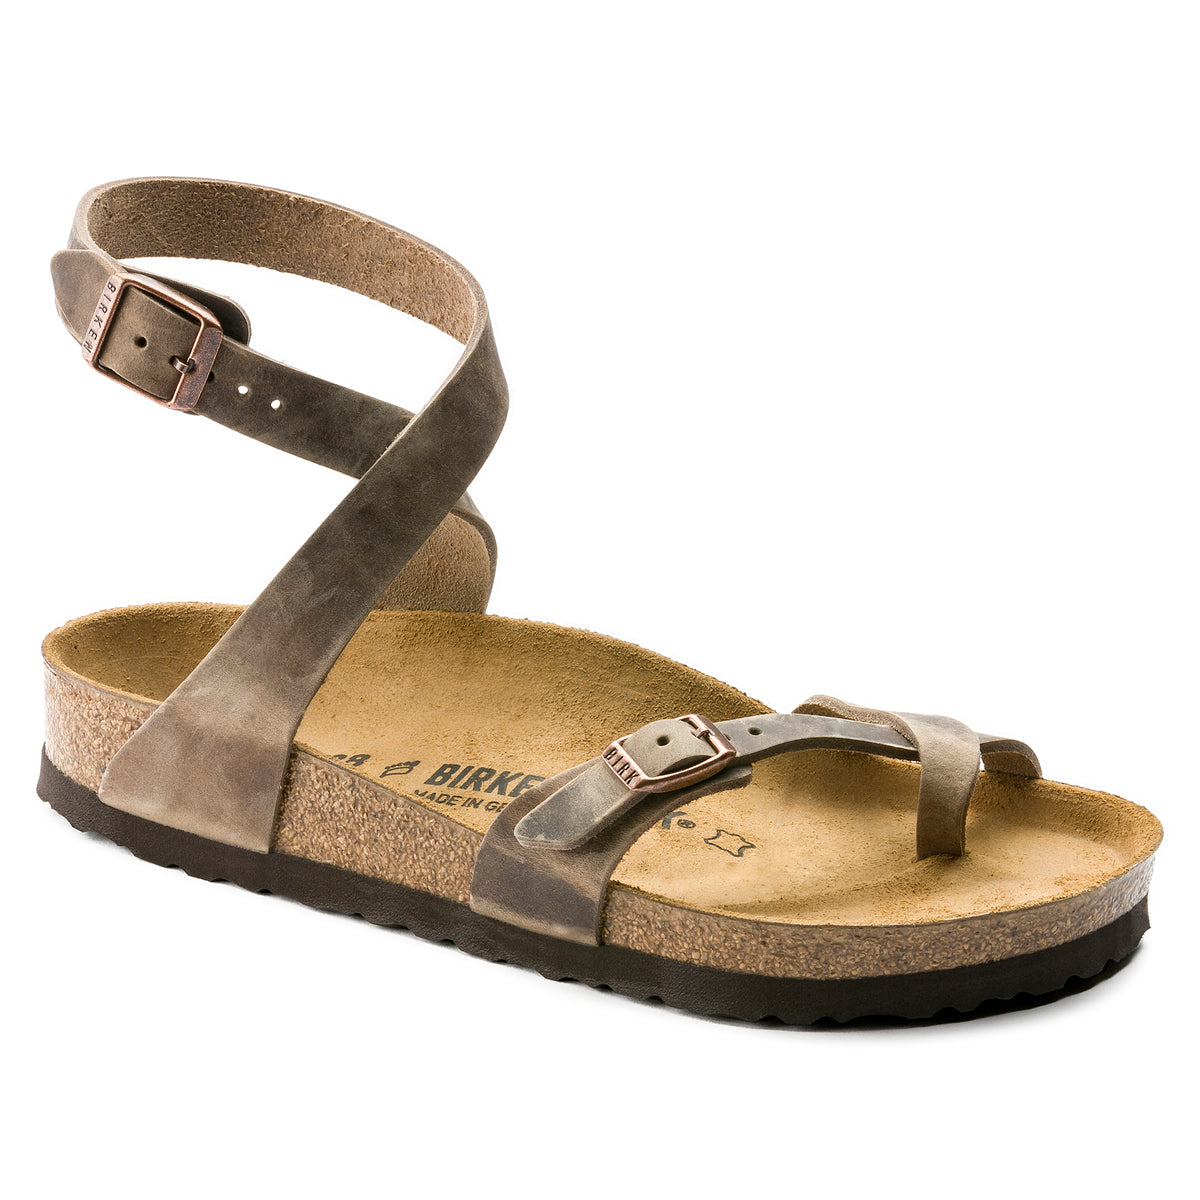 Birkenstock Limited Edition Yara tobacco oiled leather